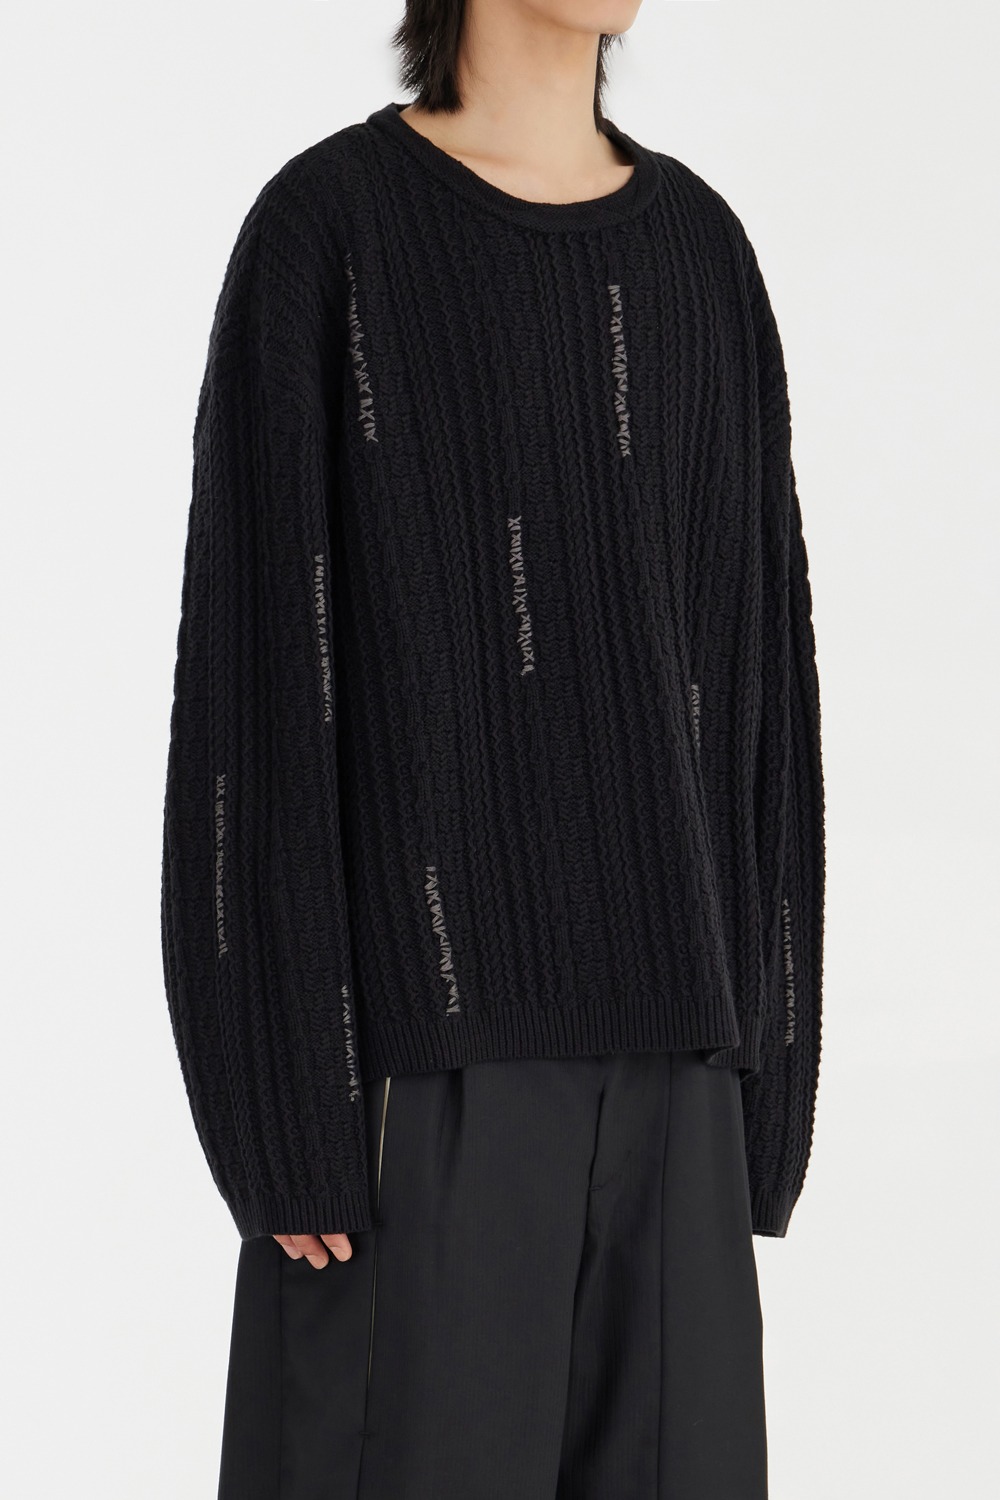 Shackles Knit Sweater - Black